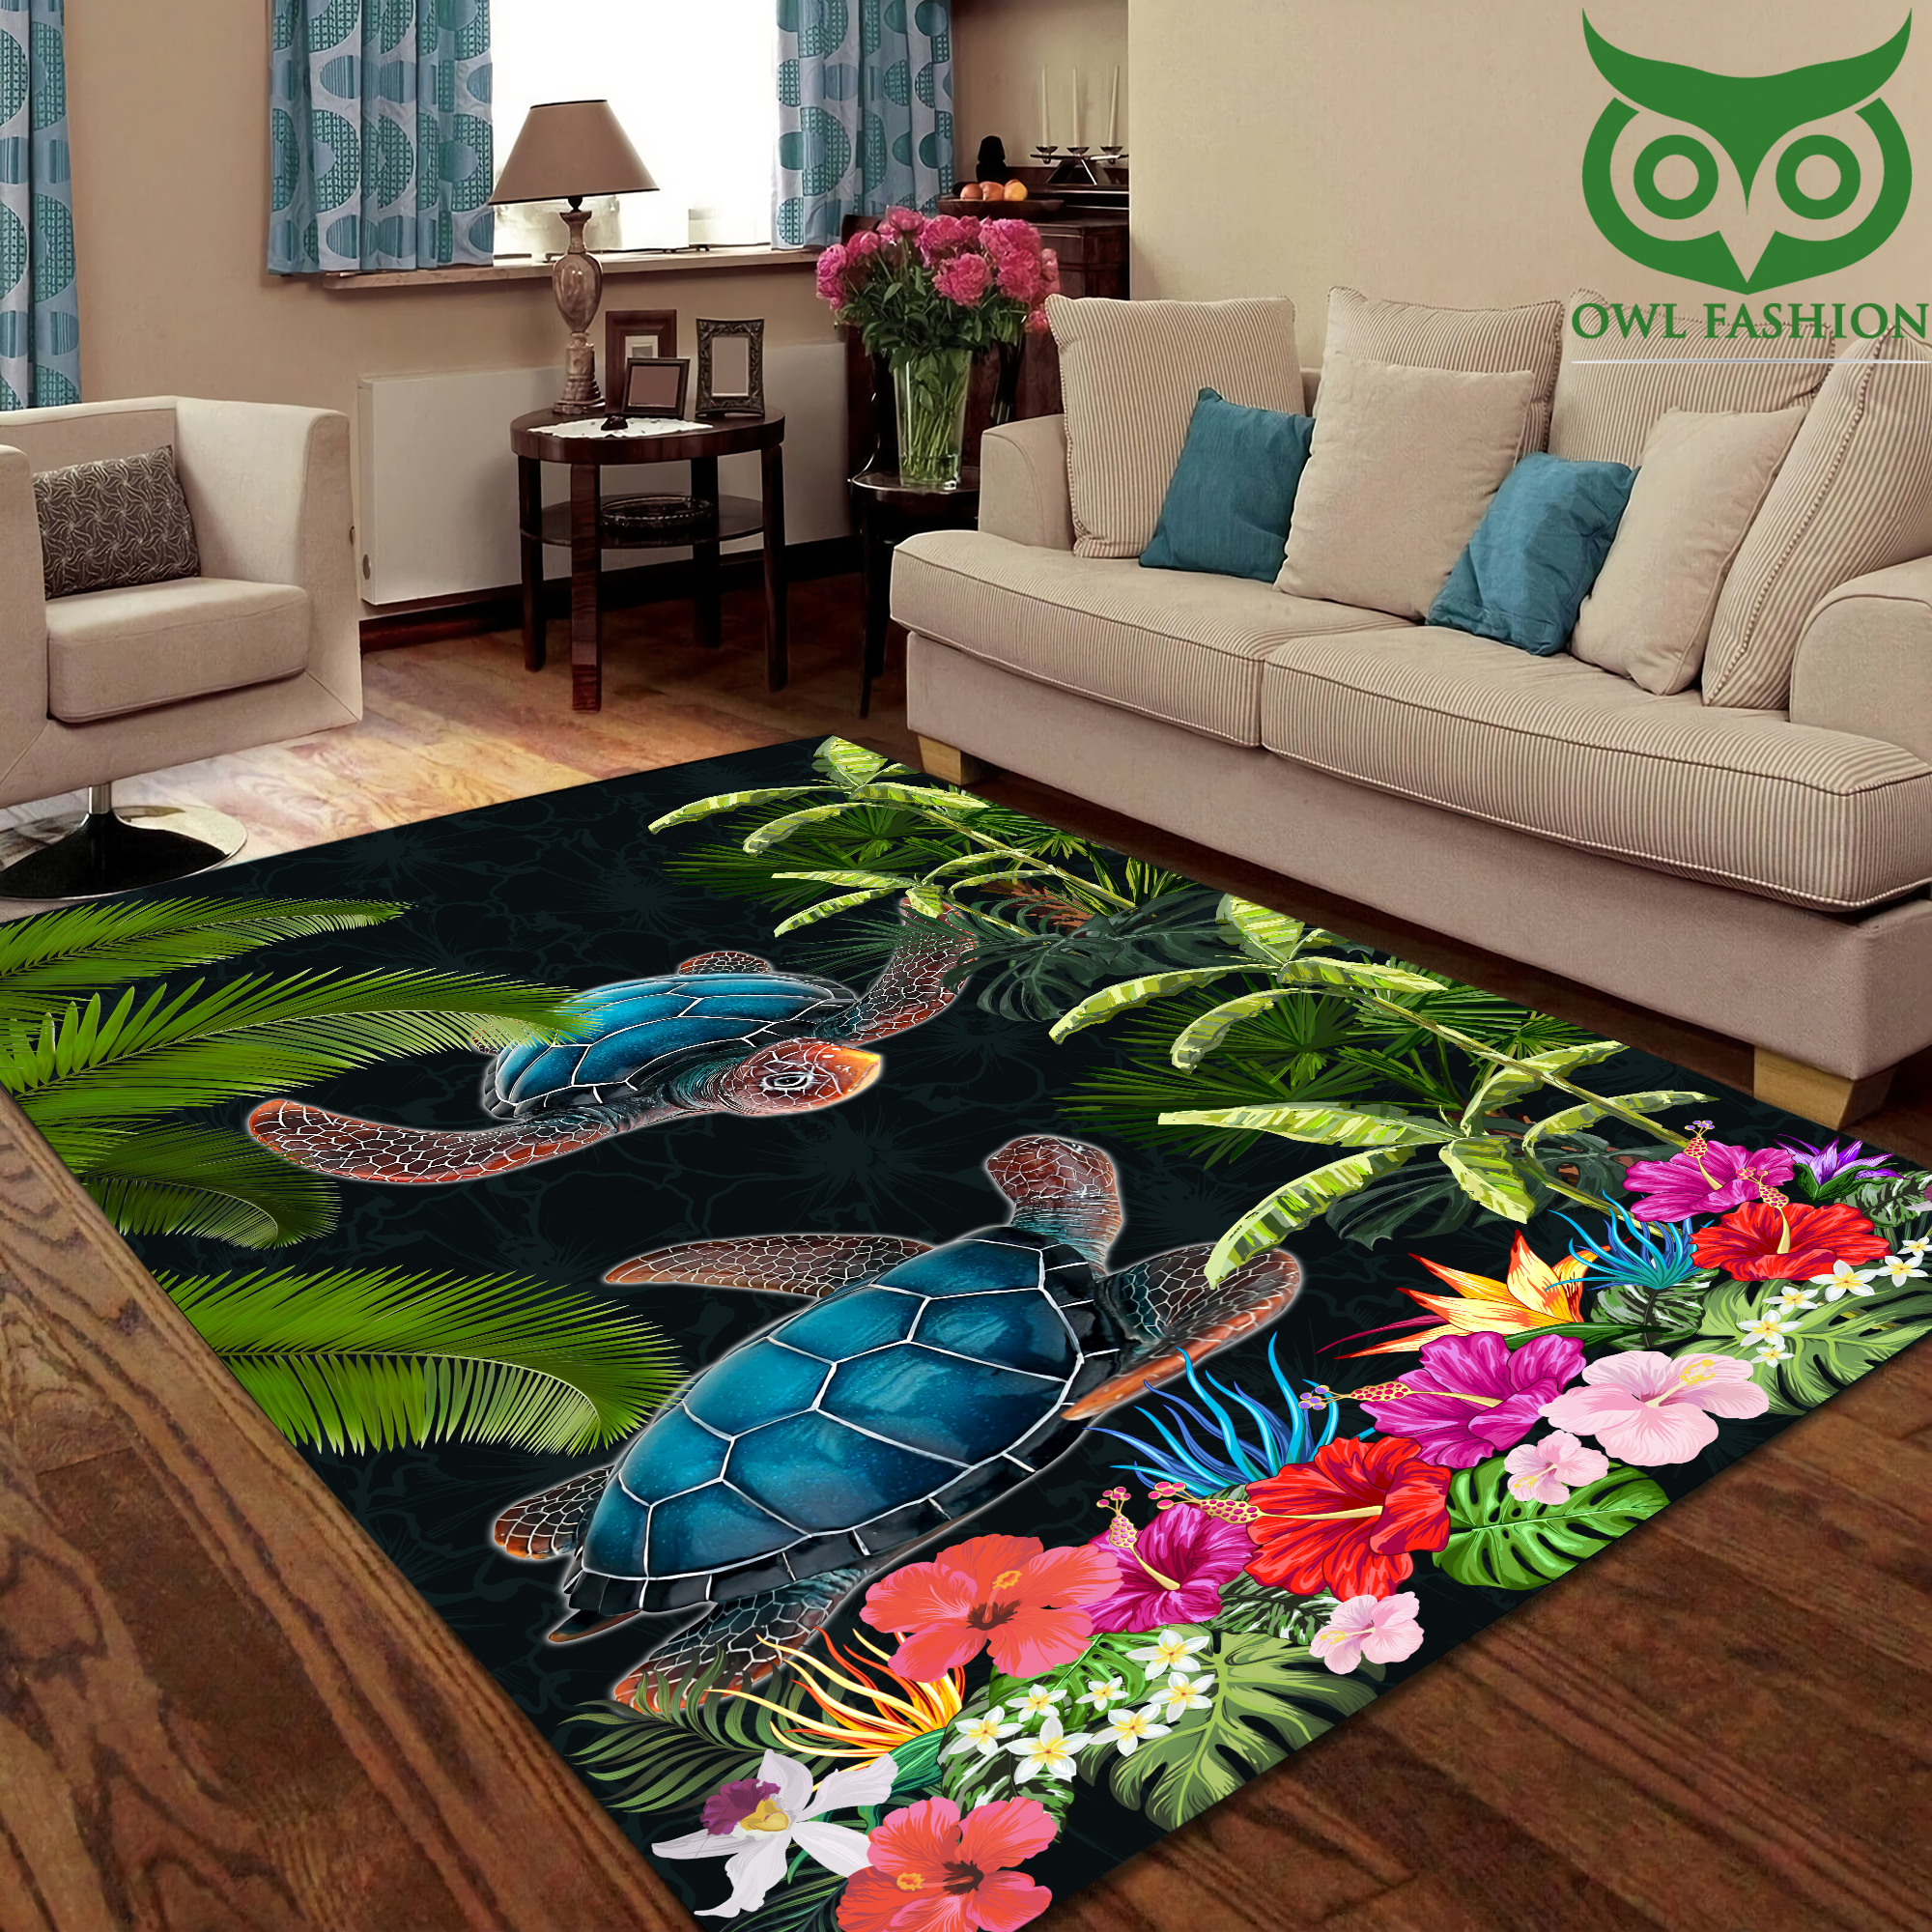 4 Turtle Couple with Flower Rug